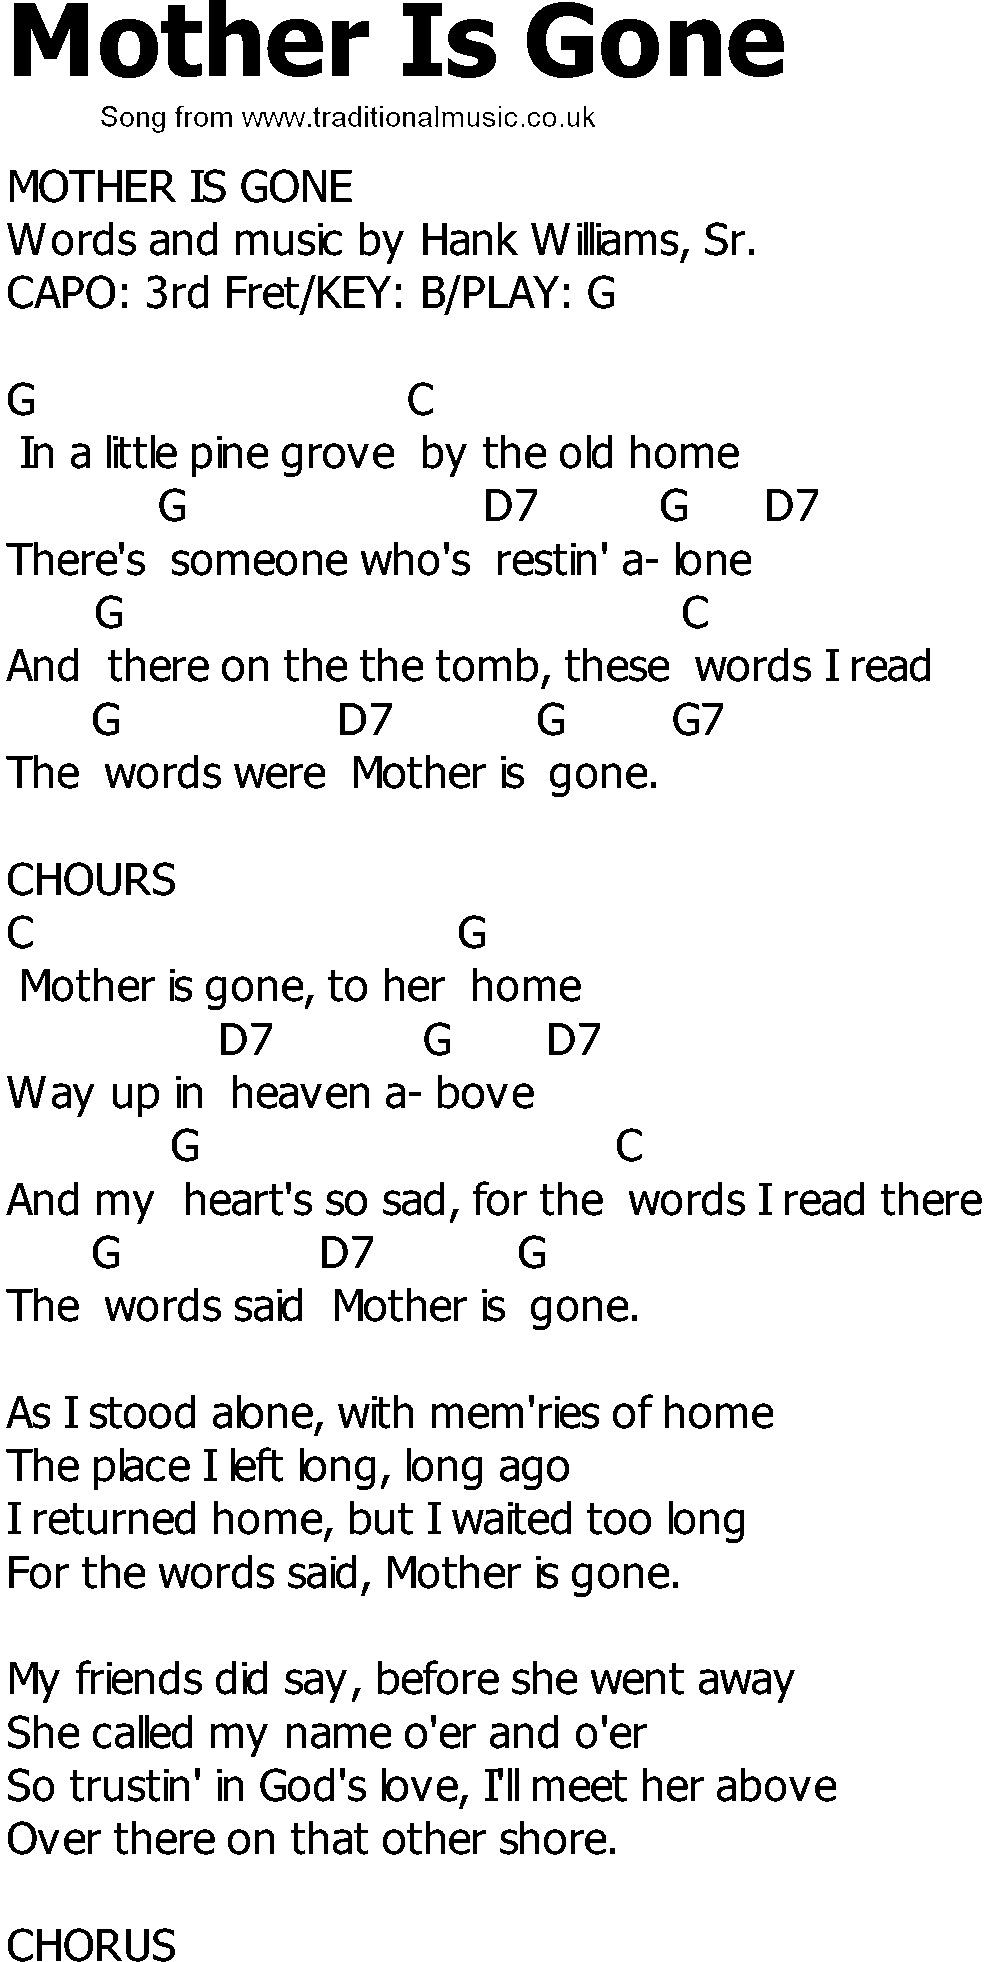 Old Country song lyrics with chords - Mother Is Gone